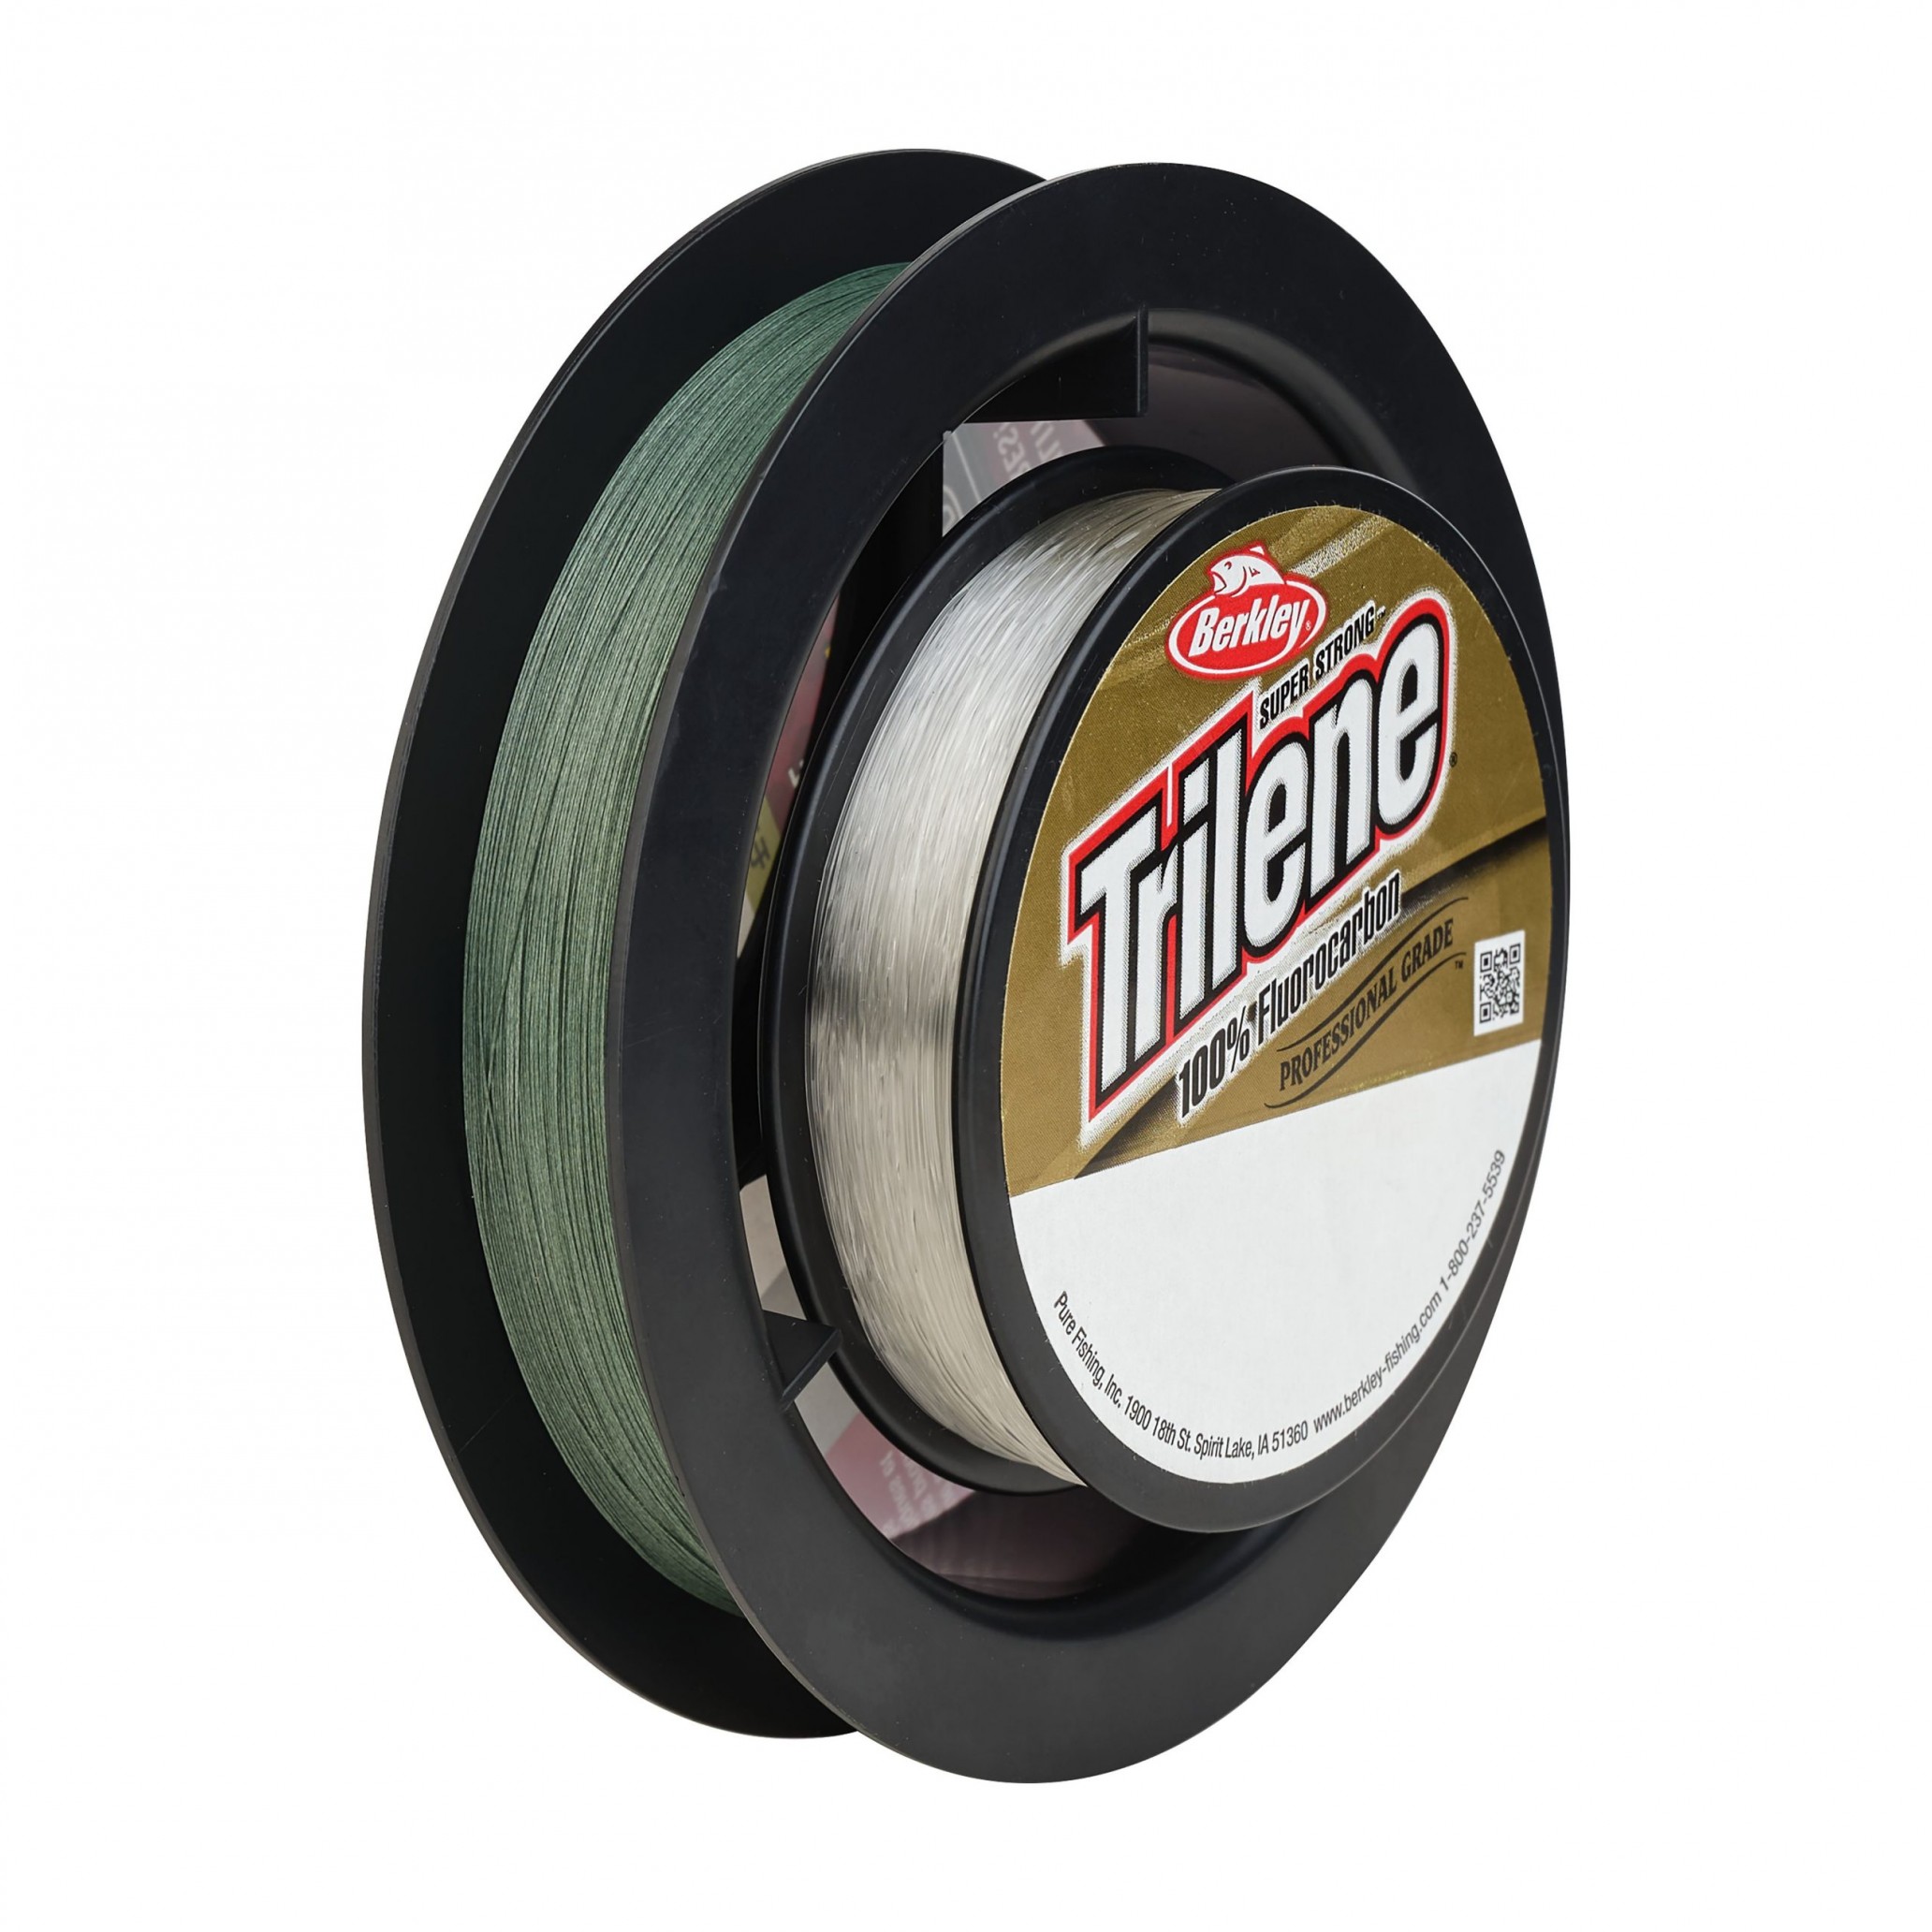 SpiderWire Stealth Braid Fishing Line 125 Yards Moss Green 15 Pounds